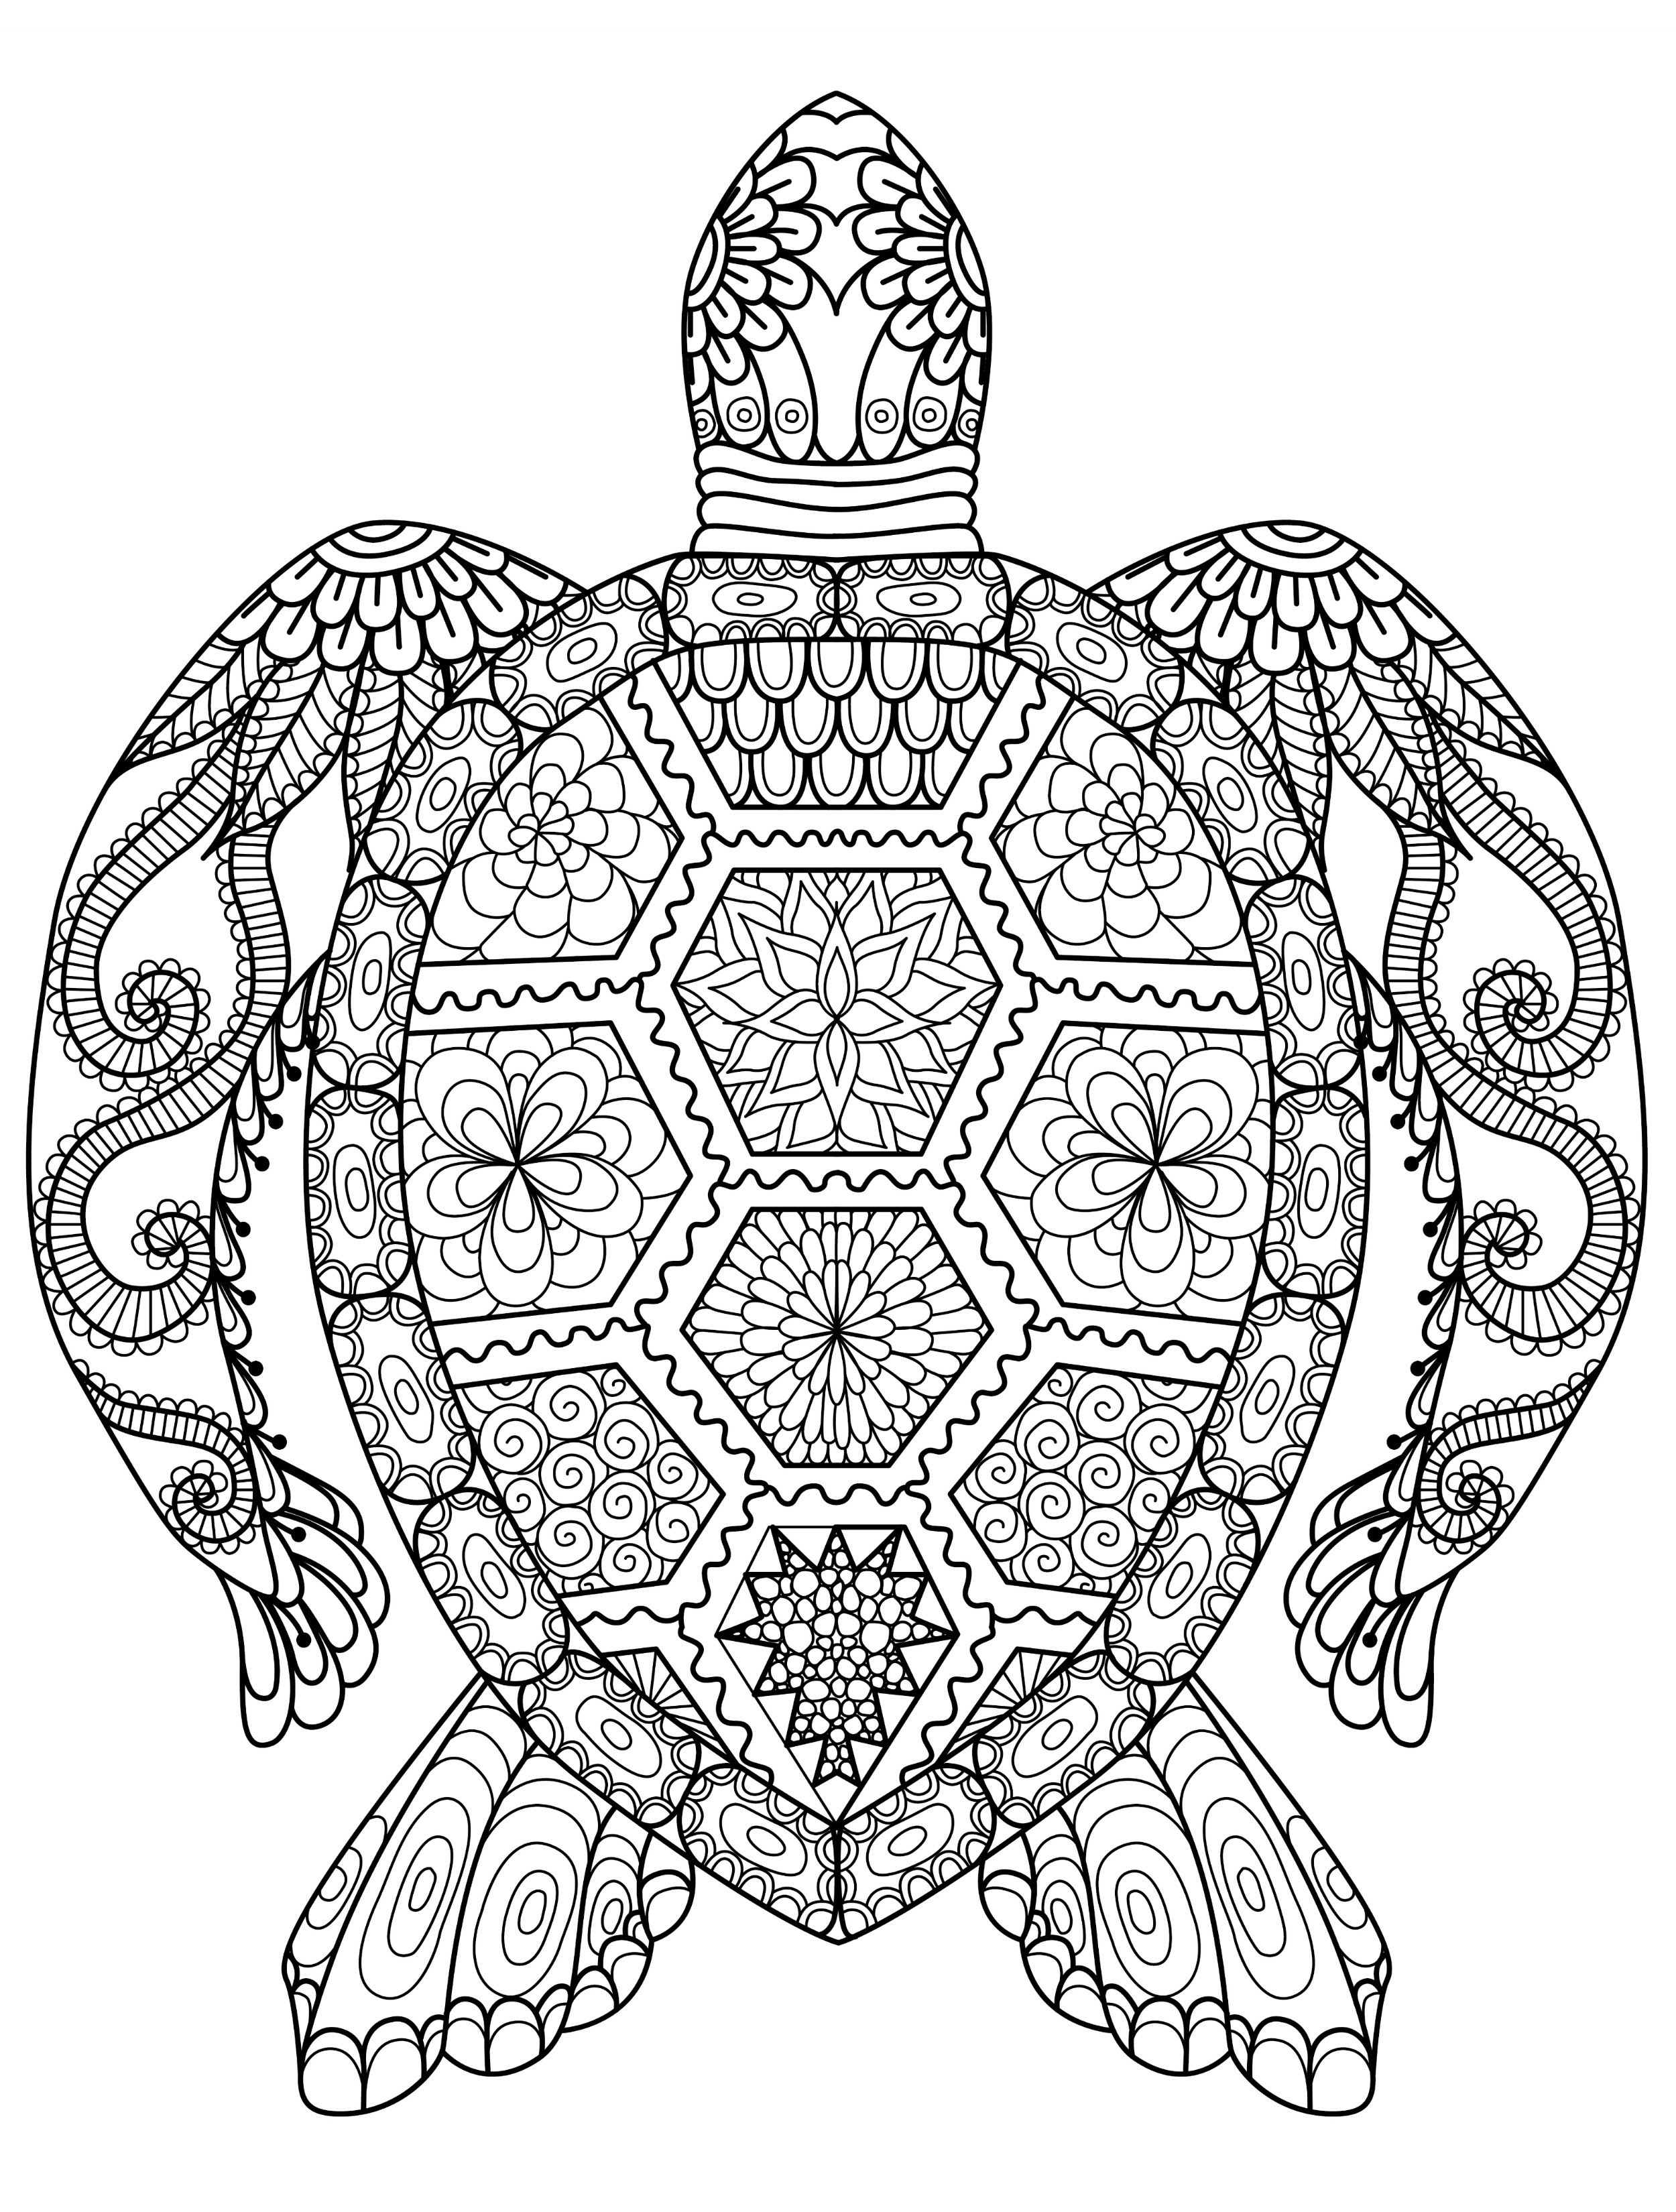 Coloring Book Pages Adult
 Adult Coloring Pages Animals Best Coloring Pages For Kids